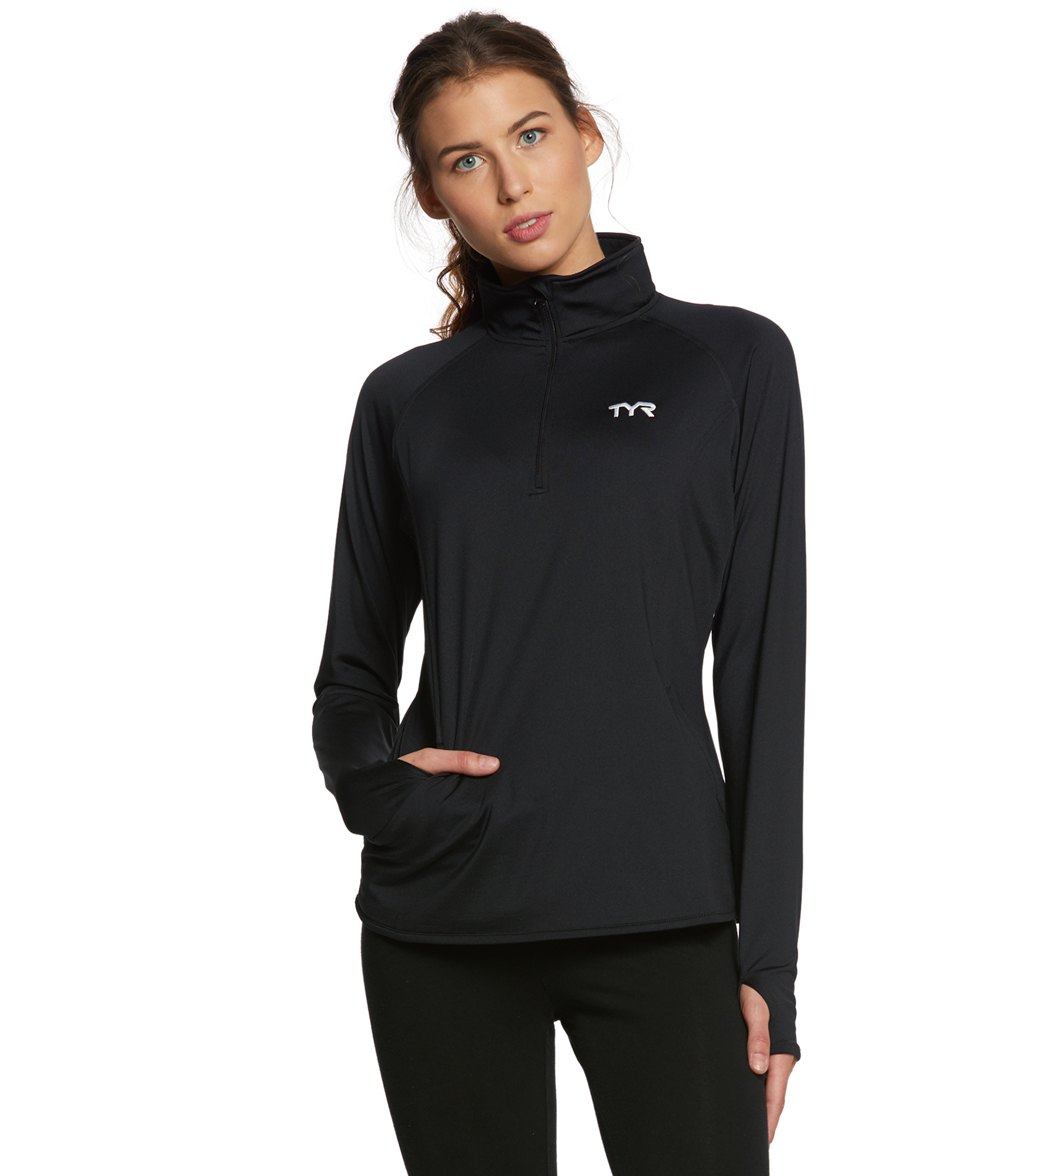 TYR Women's Alliance 1/4 Zip Pullover Warm Up Jacket at SwimOutlet.com